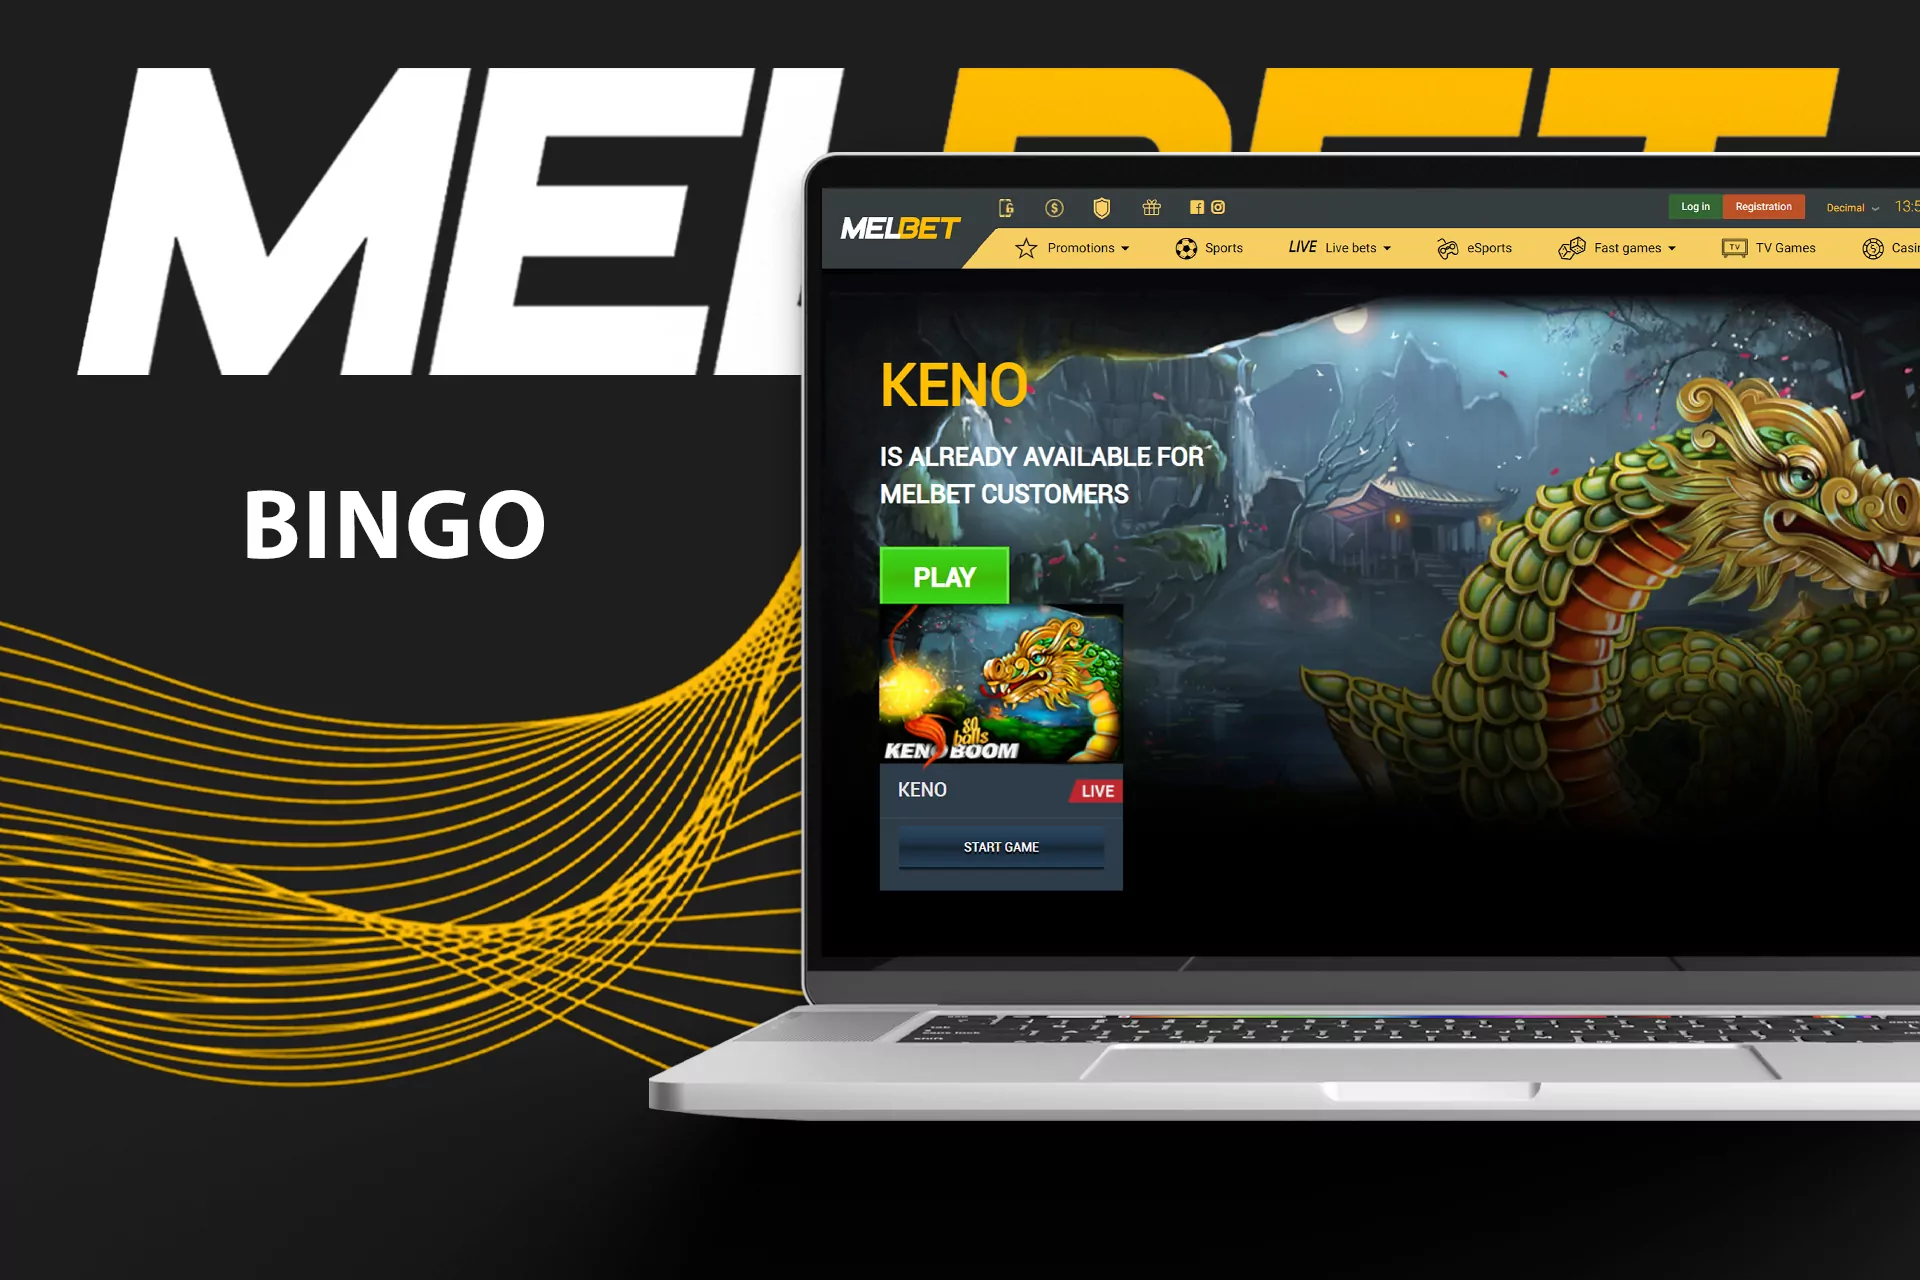 Play live keno games on the Melbet online casino.